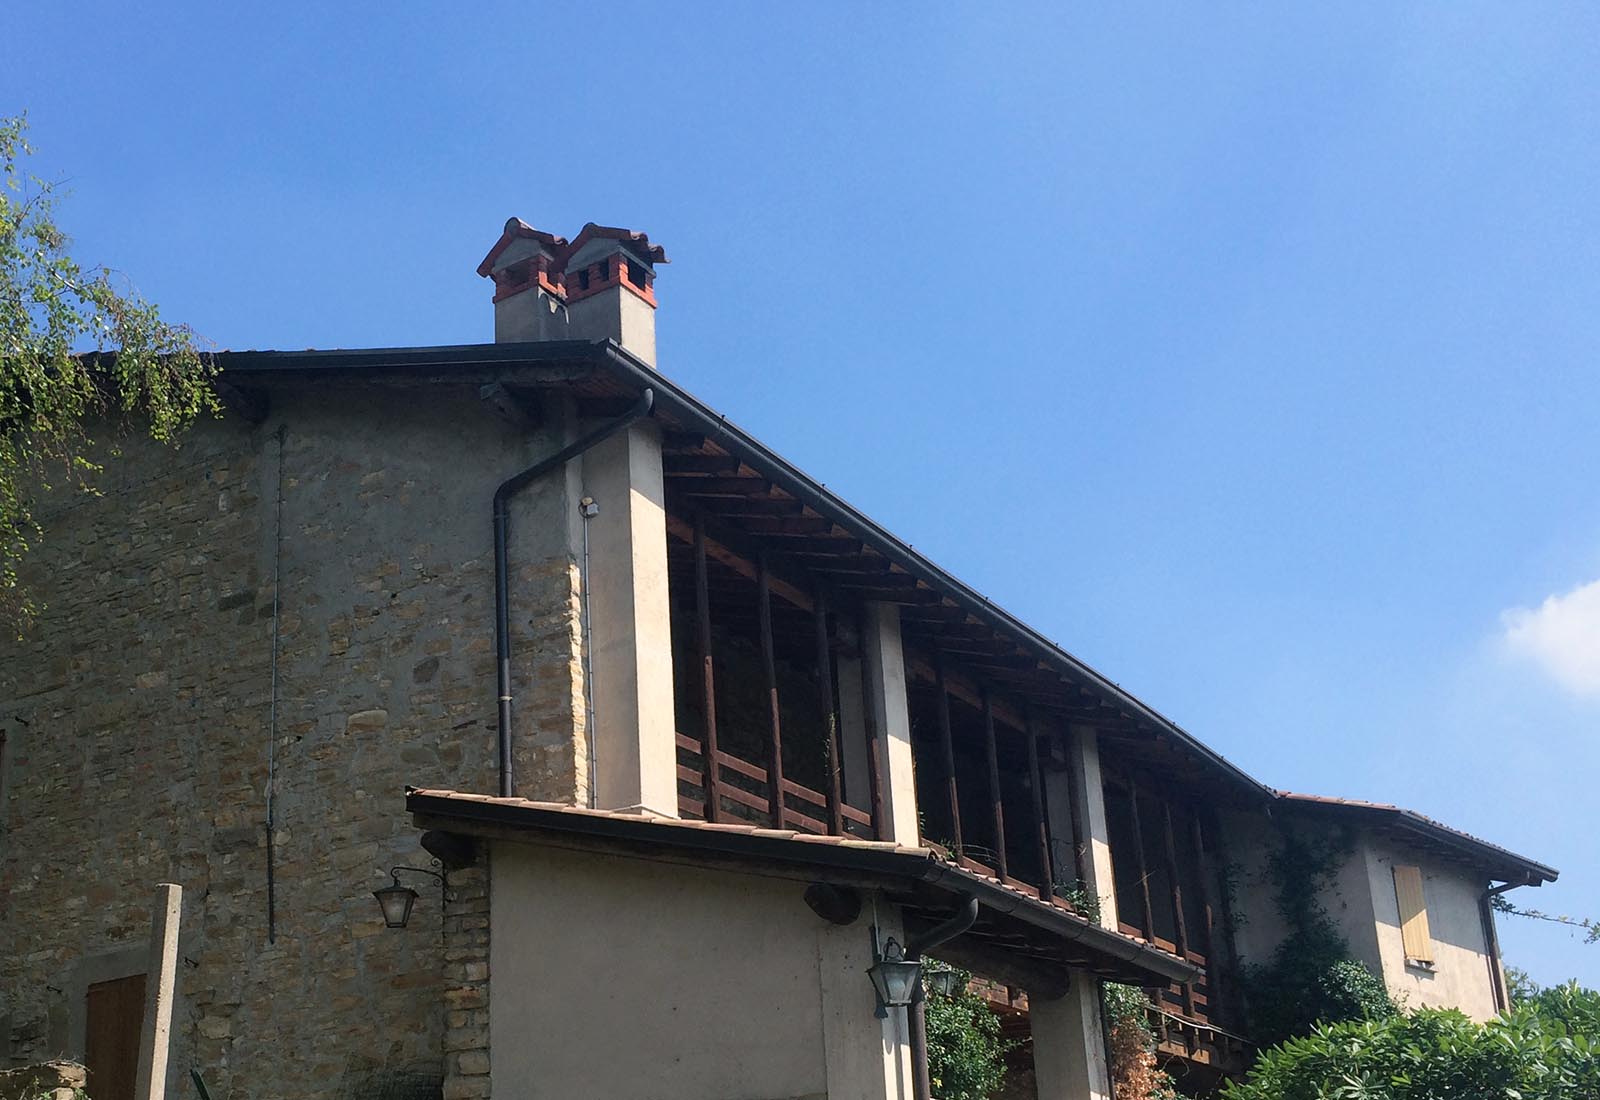 House in Sotto il Monte Giovanni XXIII - Existing situation